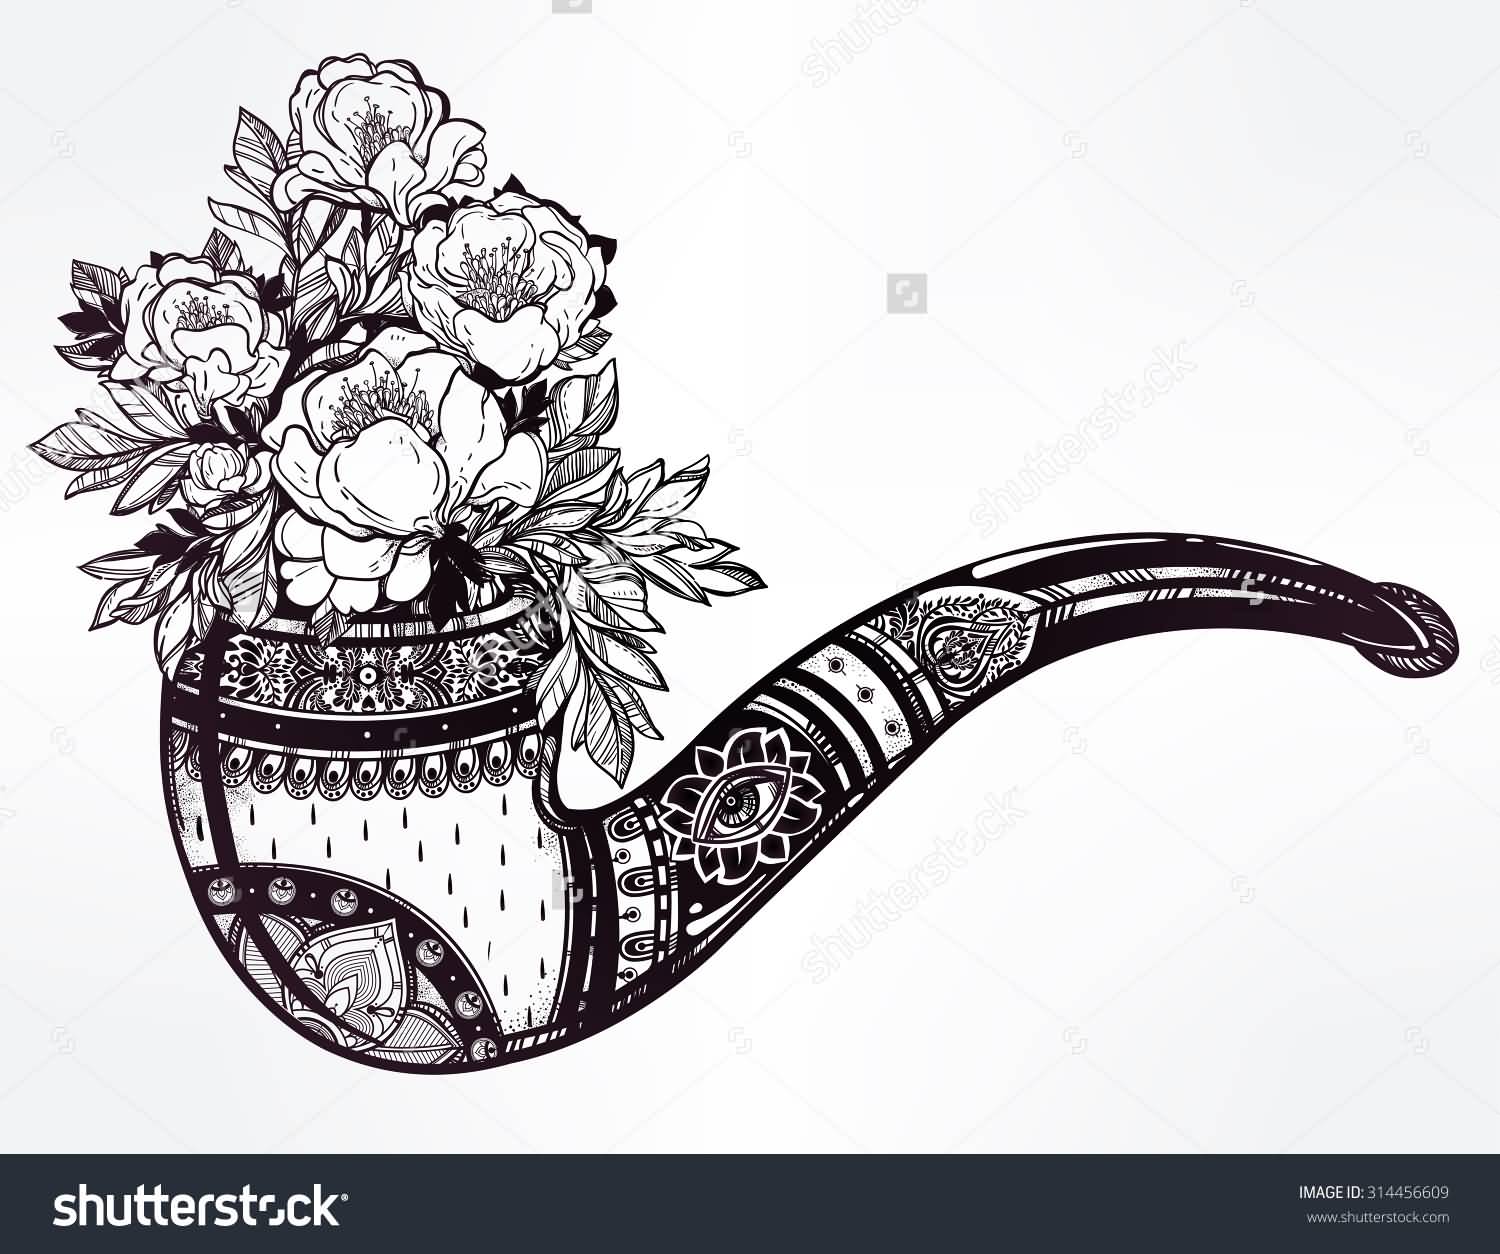 Black Tobacco Pipe With Flowers Tattoo Design